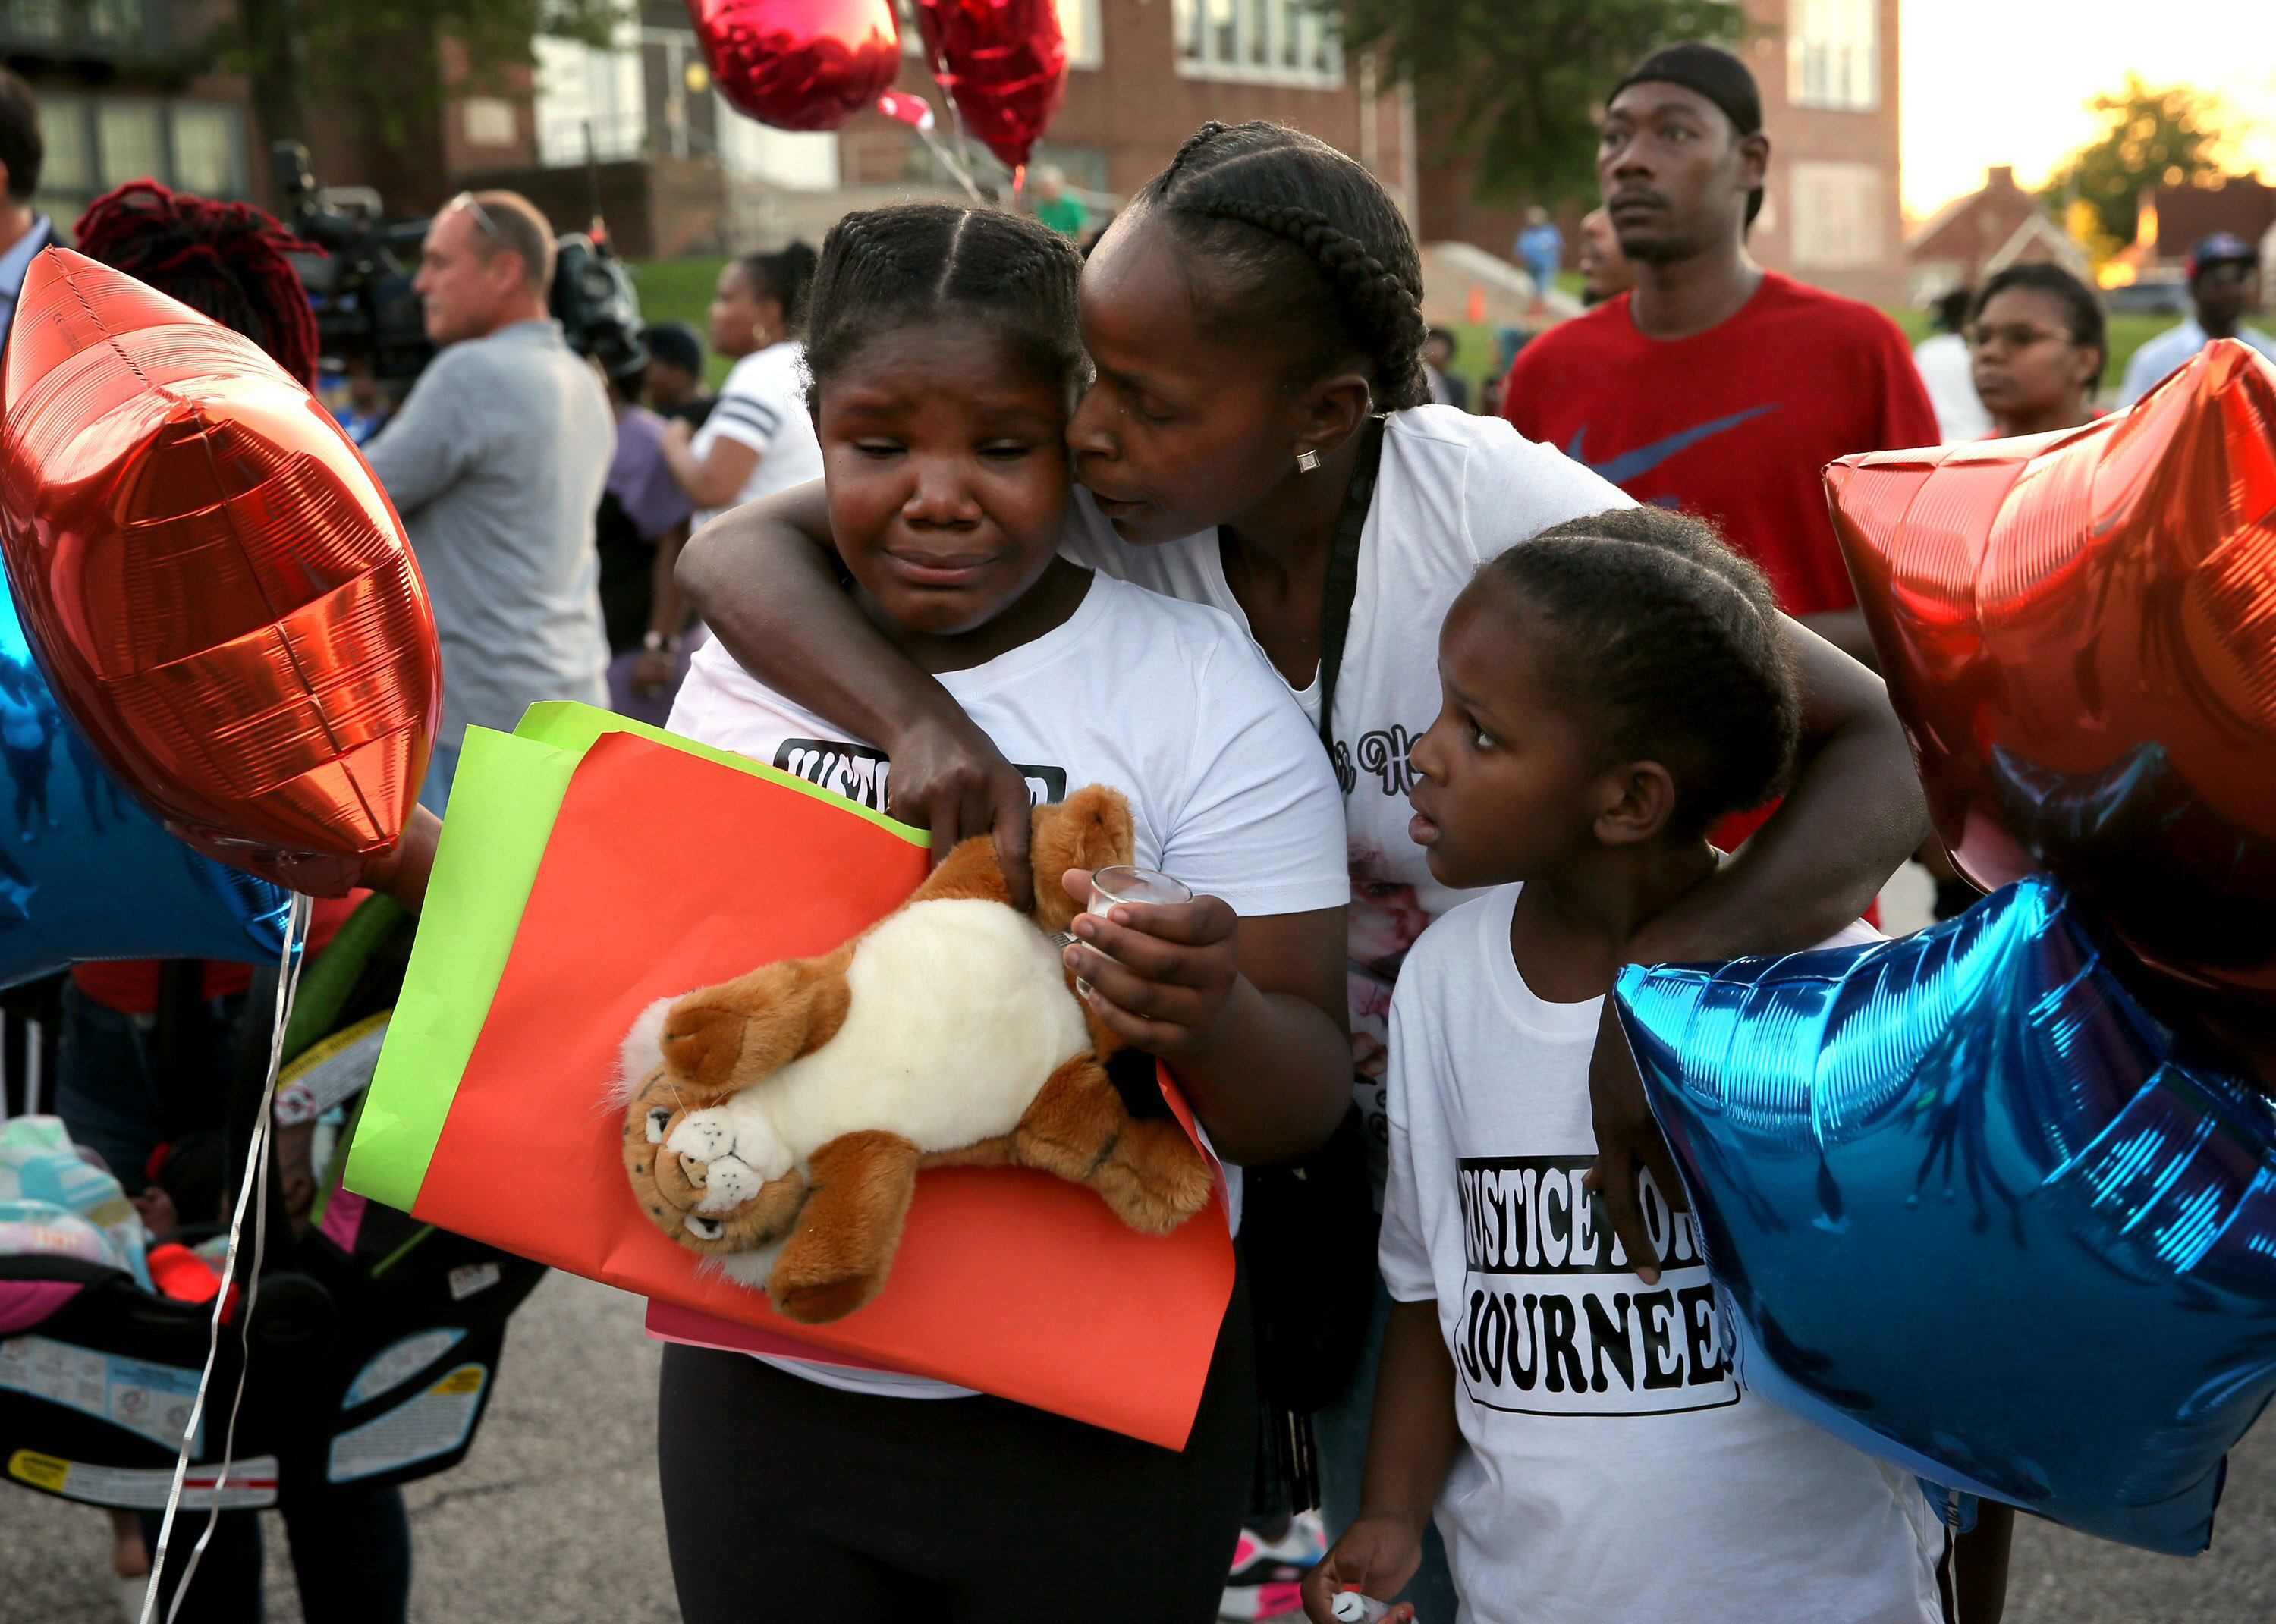 Shardae Edmondson, 11, is consoled by her mother Sharonda Edmondson and sister Zha'lea Thompson, 7, during a vigil for murdered children in St. Louis held at Herzog Elementary School in St. Louis, on Wednesday, Aug. 28, 2019. Shardae and Zha'lea are sisters of 8-year-old Jurnee Thompson who was killed by a stray bullet last Friday night. (David Carson/St. Louis Post-Dispatch via AP) (David Carson&mdash;AP)